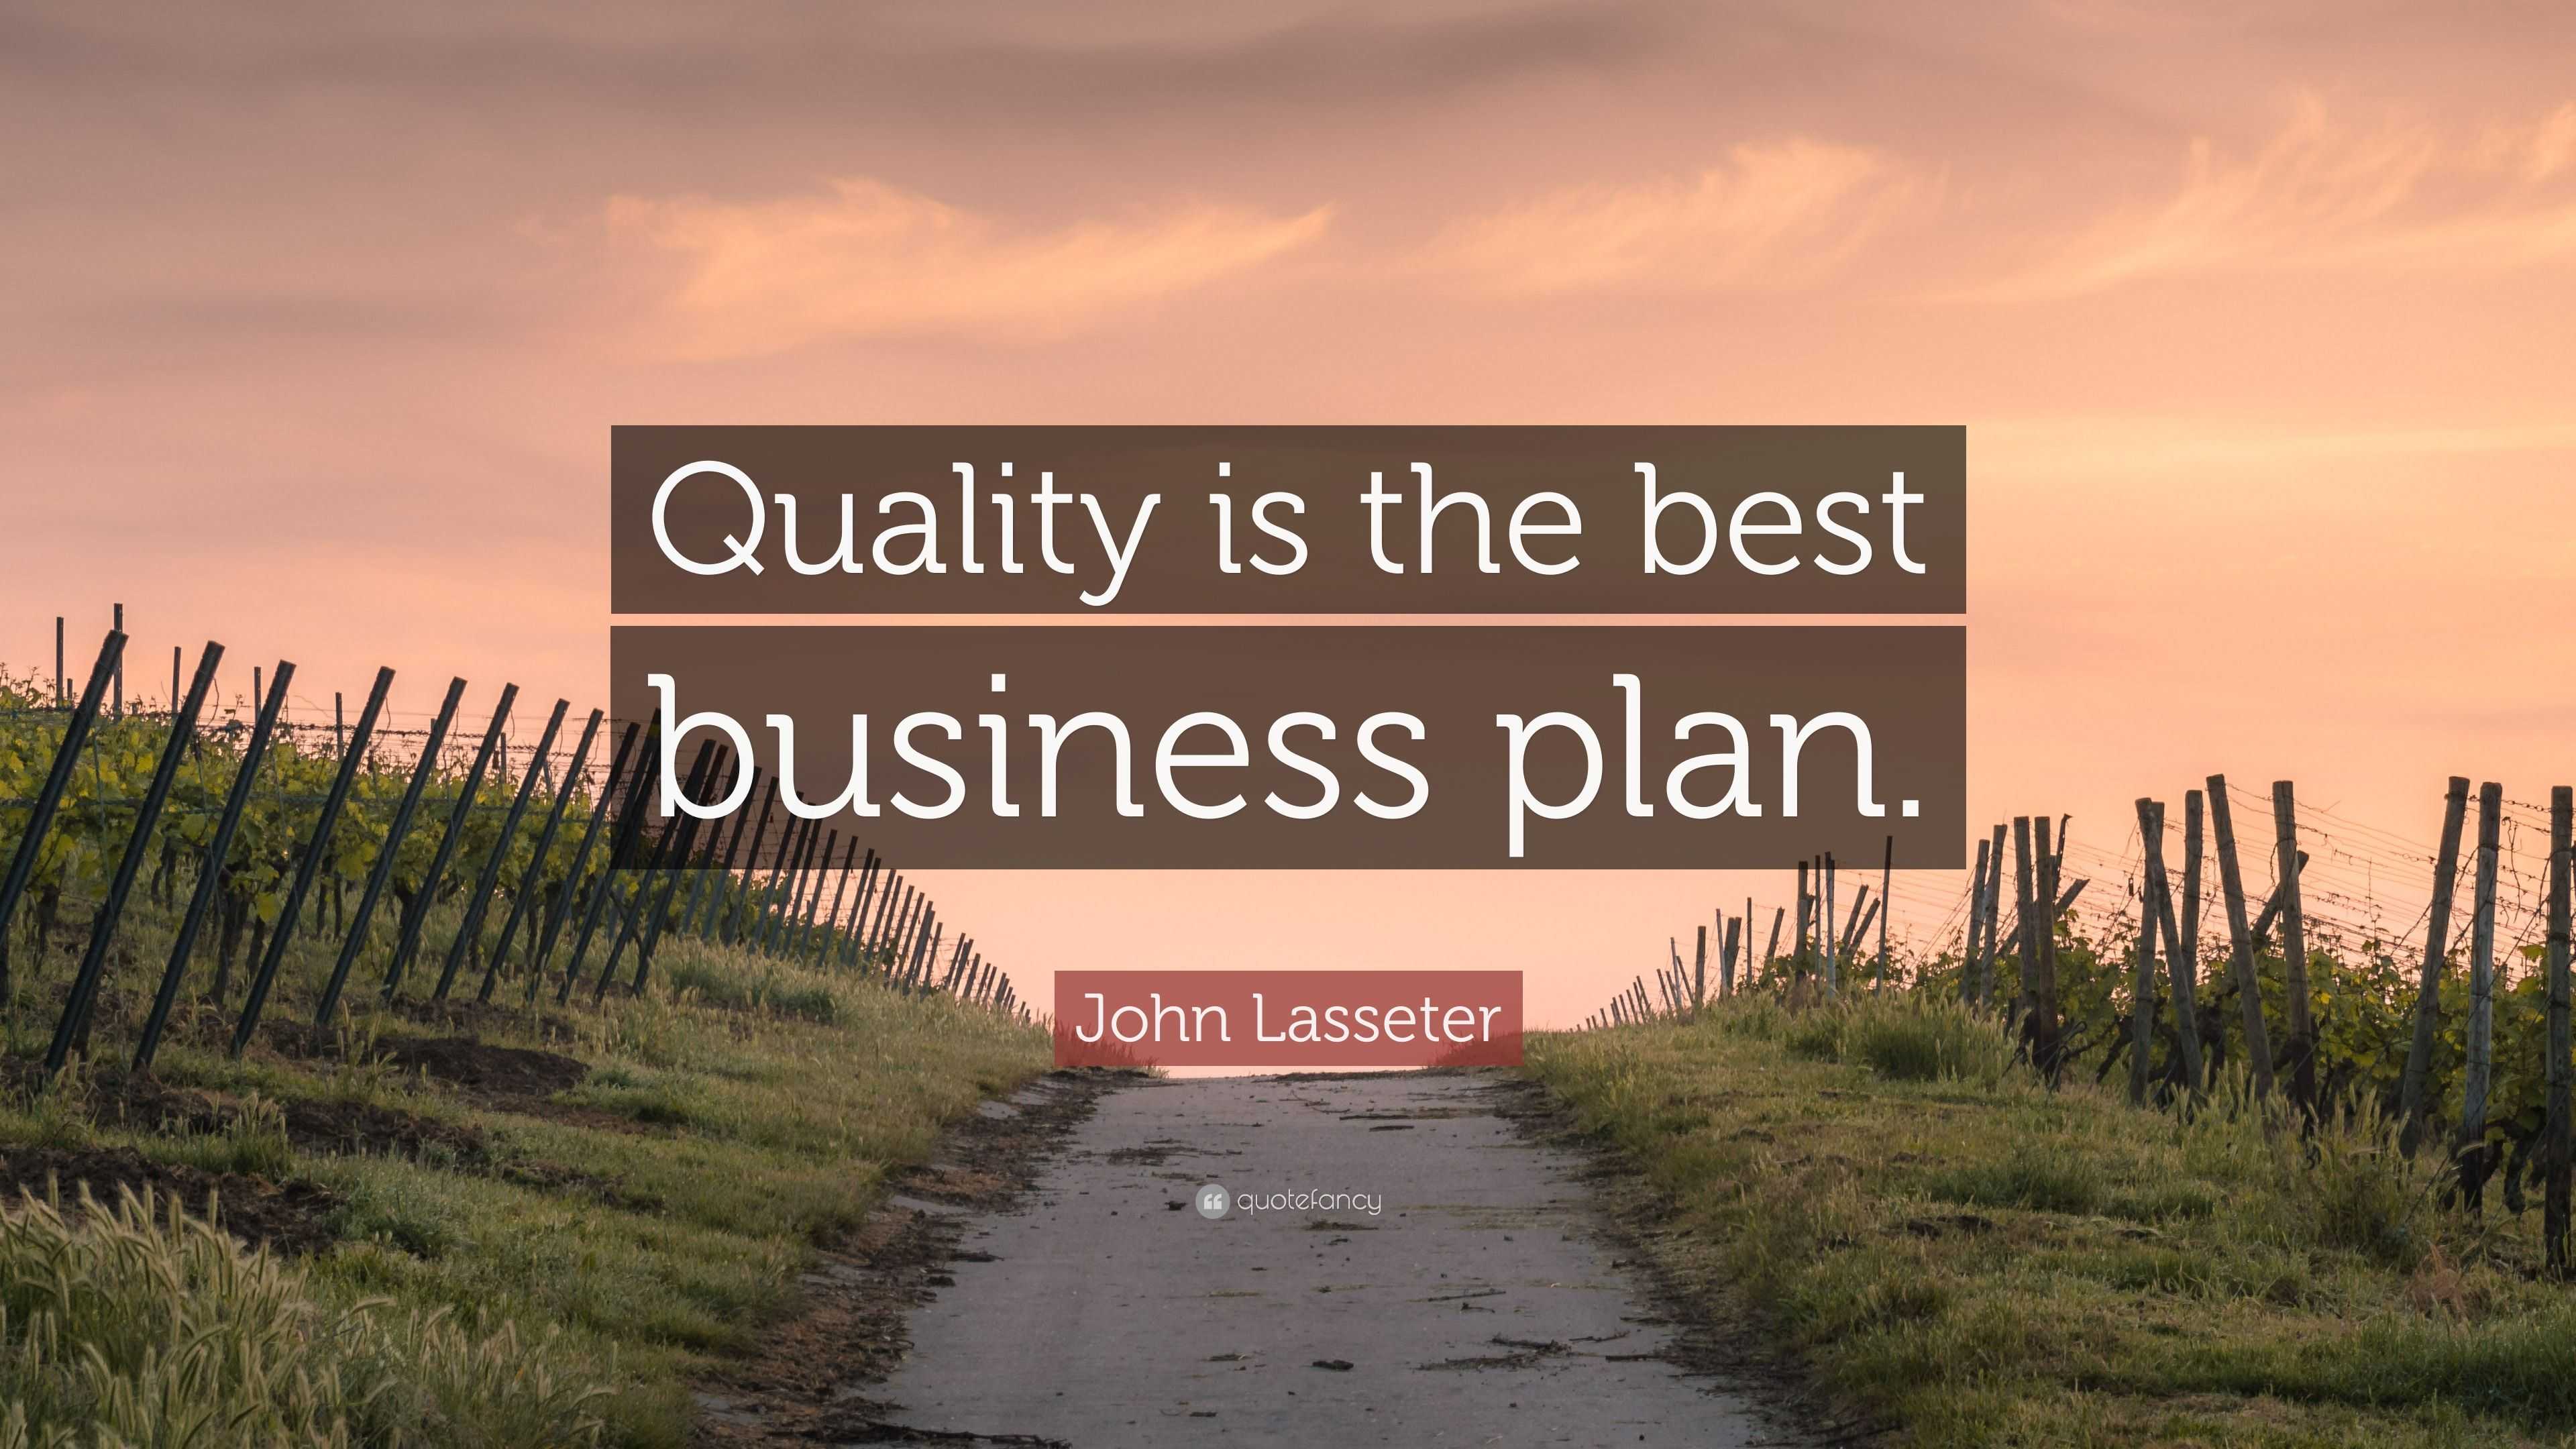 he said quality is the best business plan